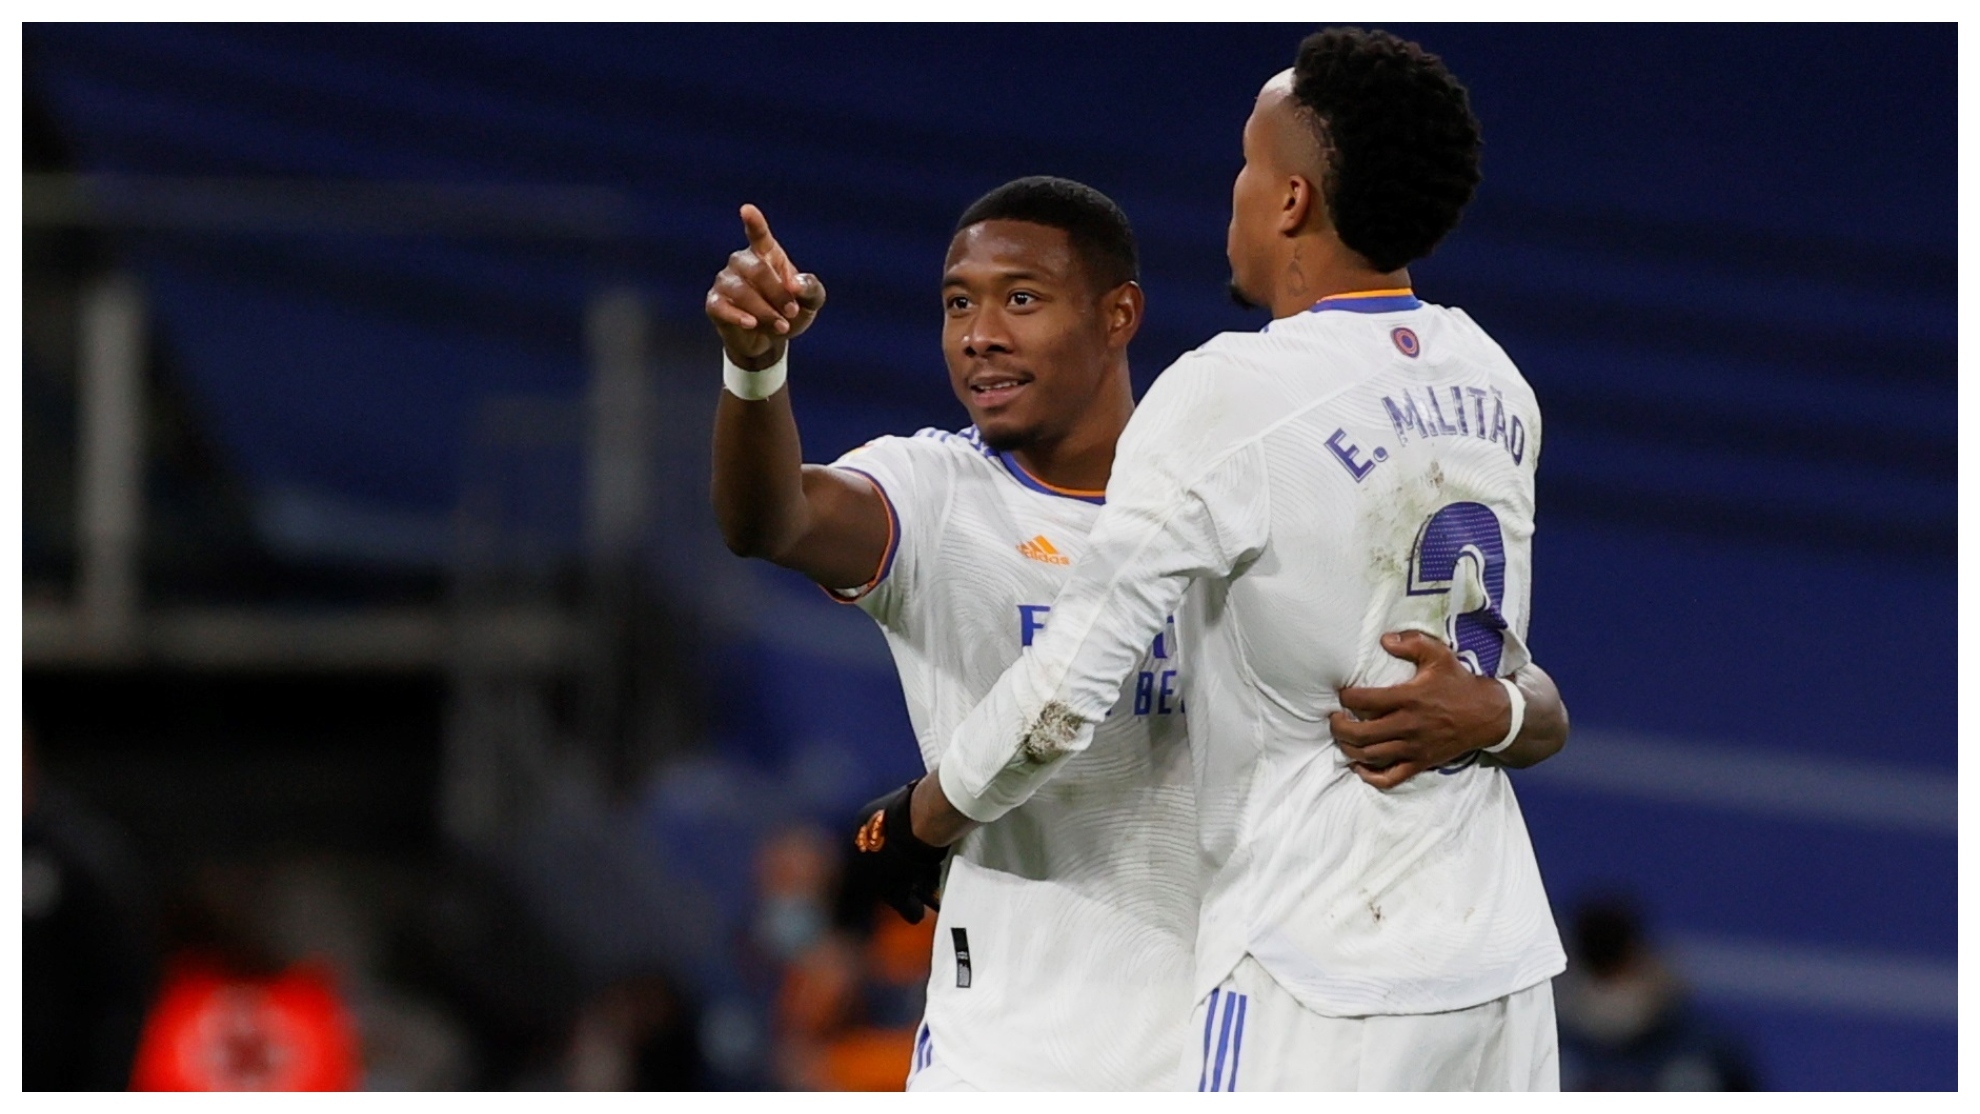 Alaba and Militao with Real Madrid.